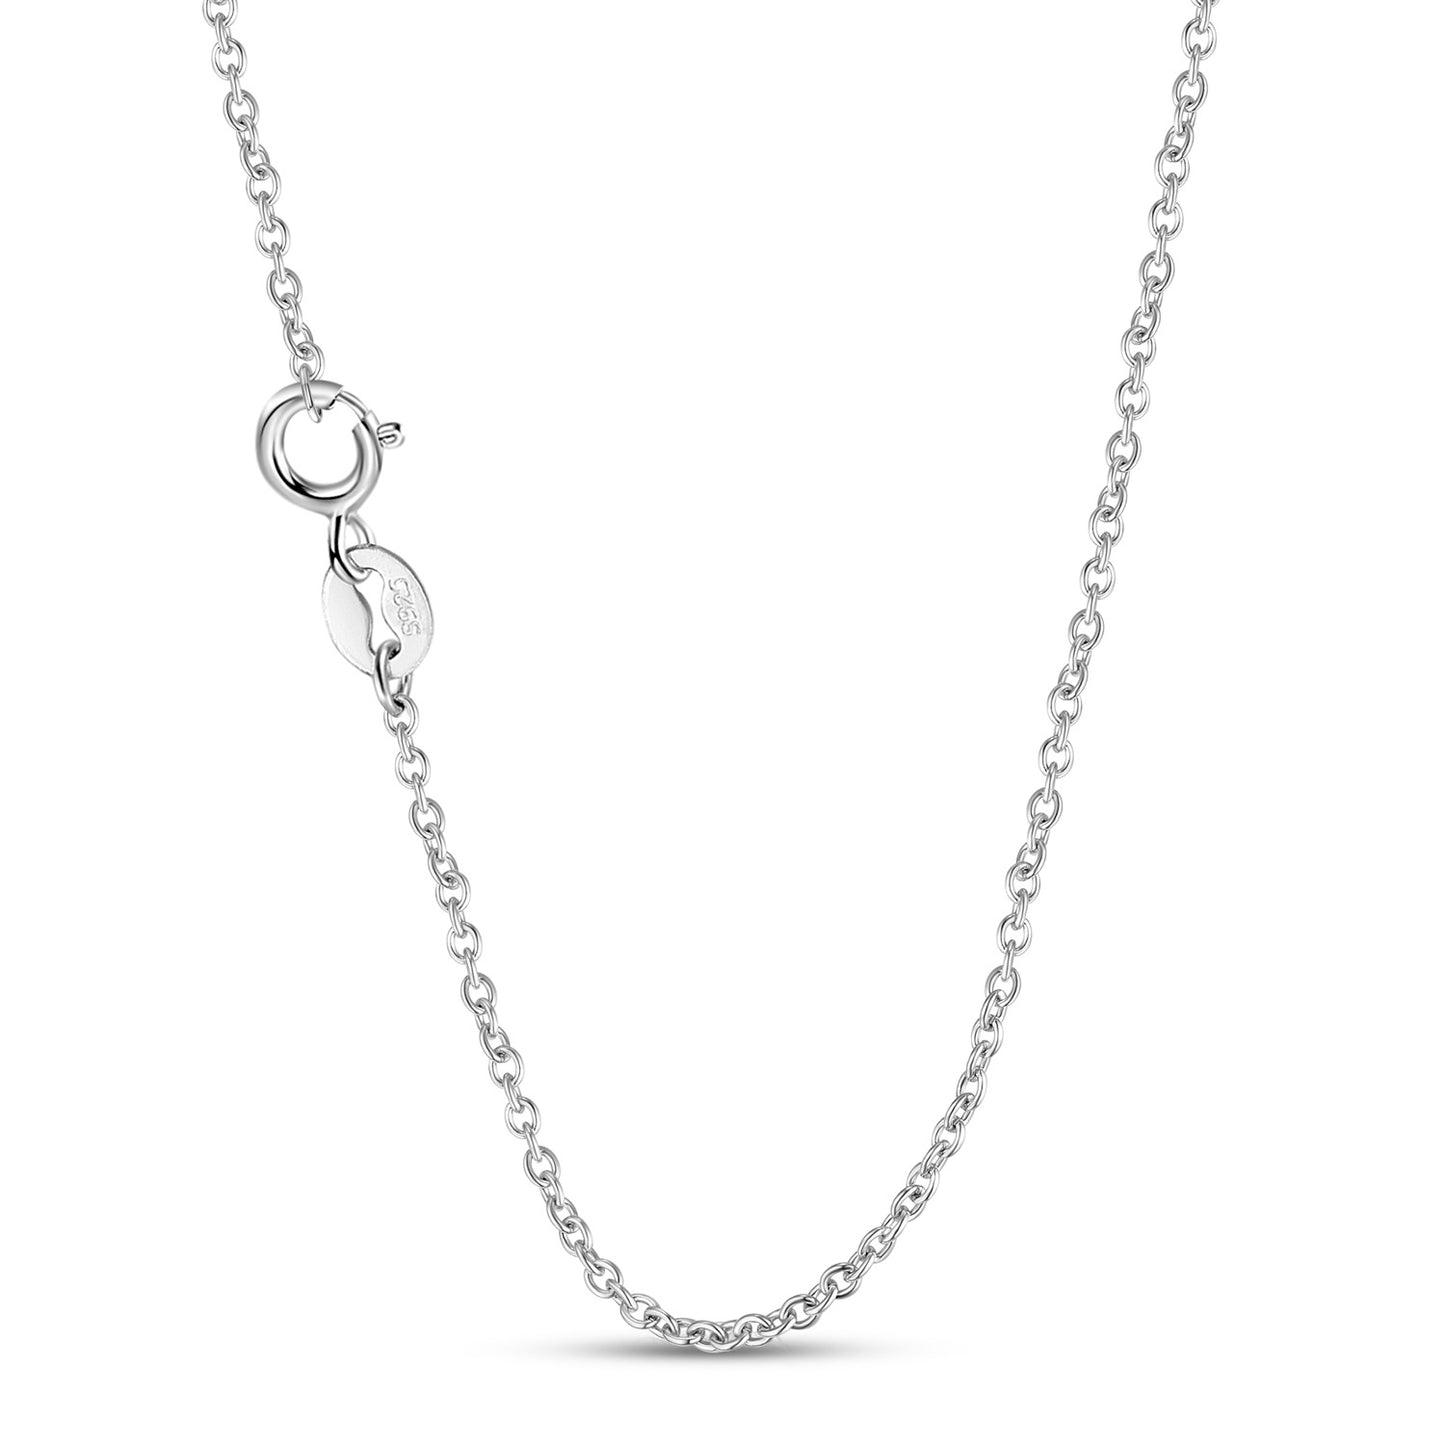 Bowknot Hollow Garden Pear Shape Crystal Silver Necklace